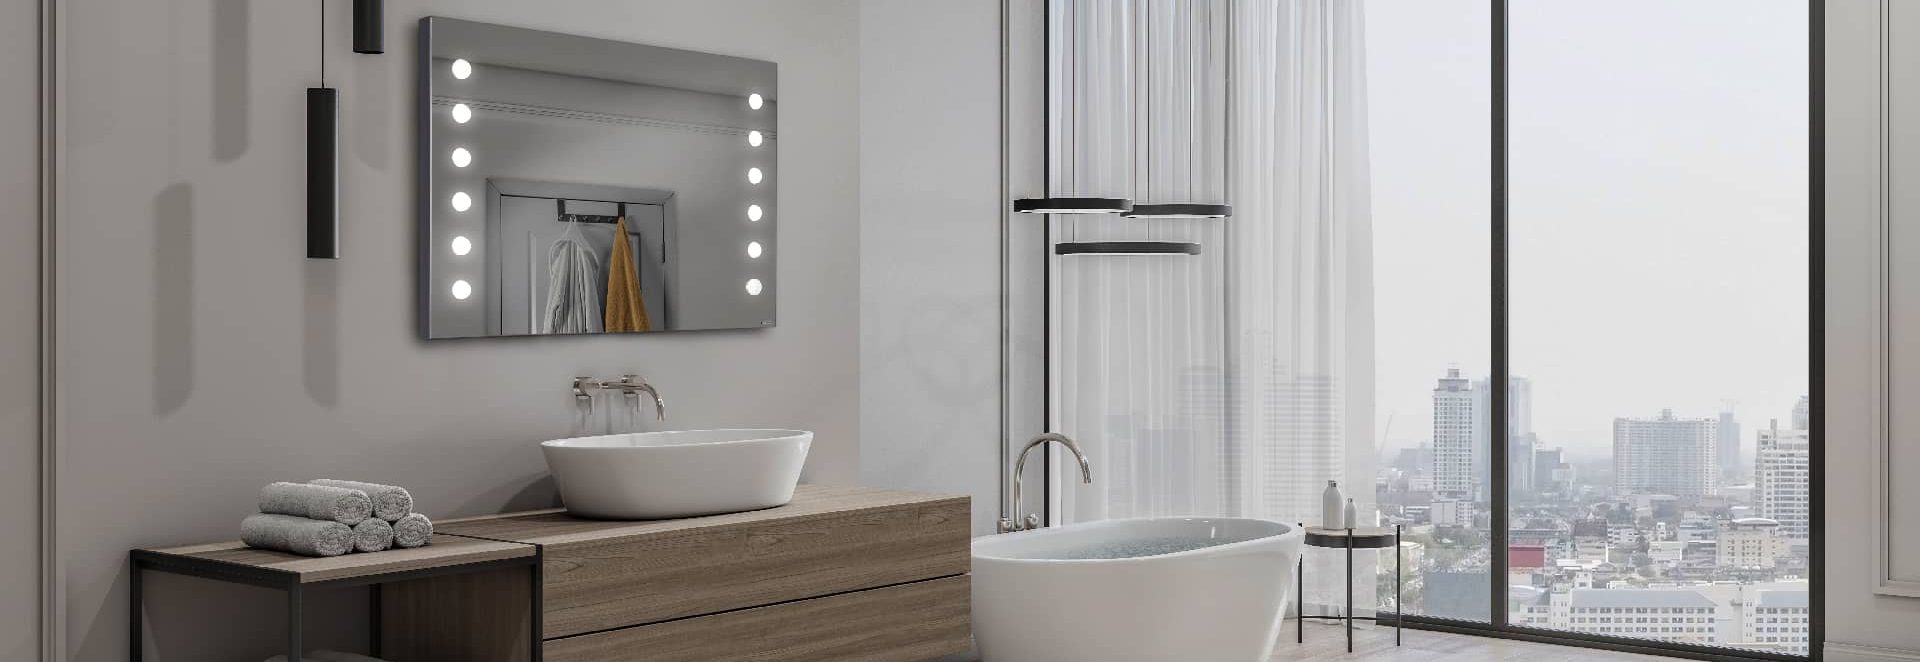 Large frameless mirror with 12 led light in a modern bathroom